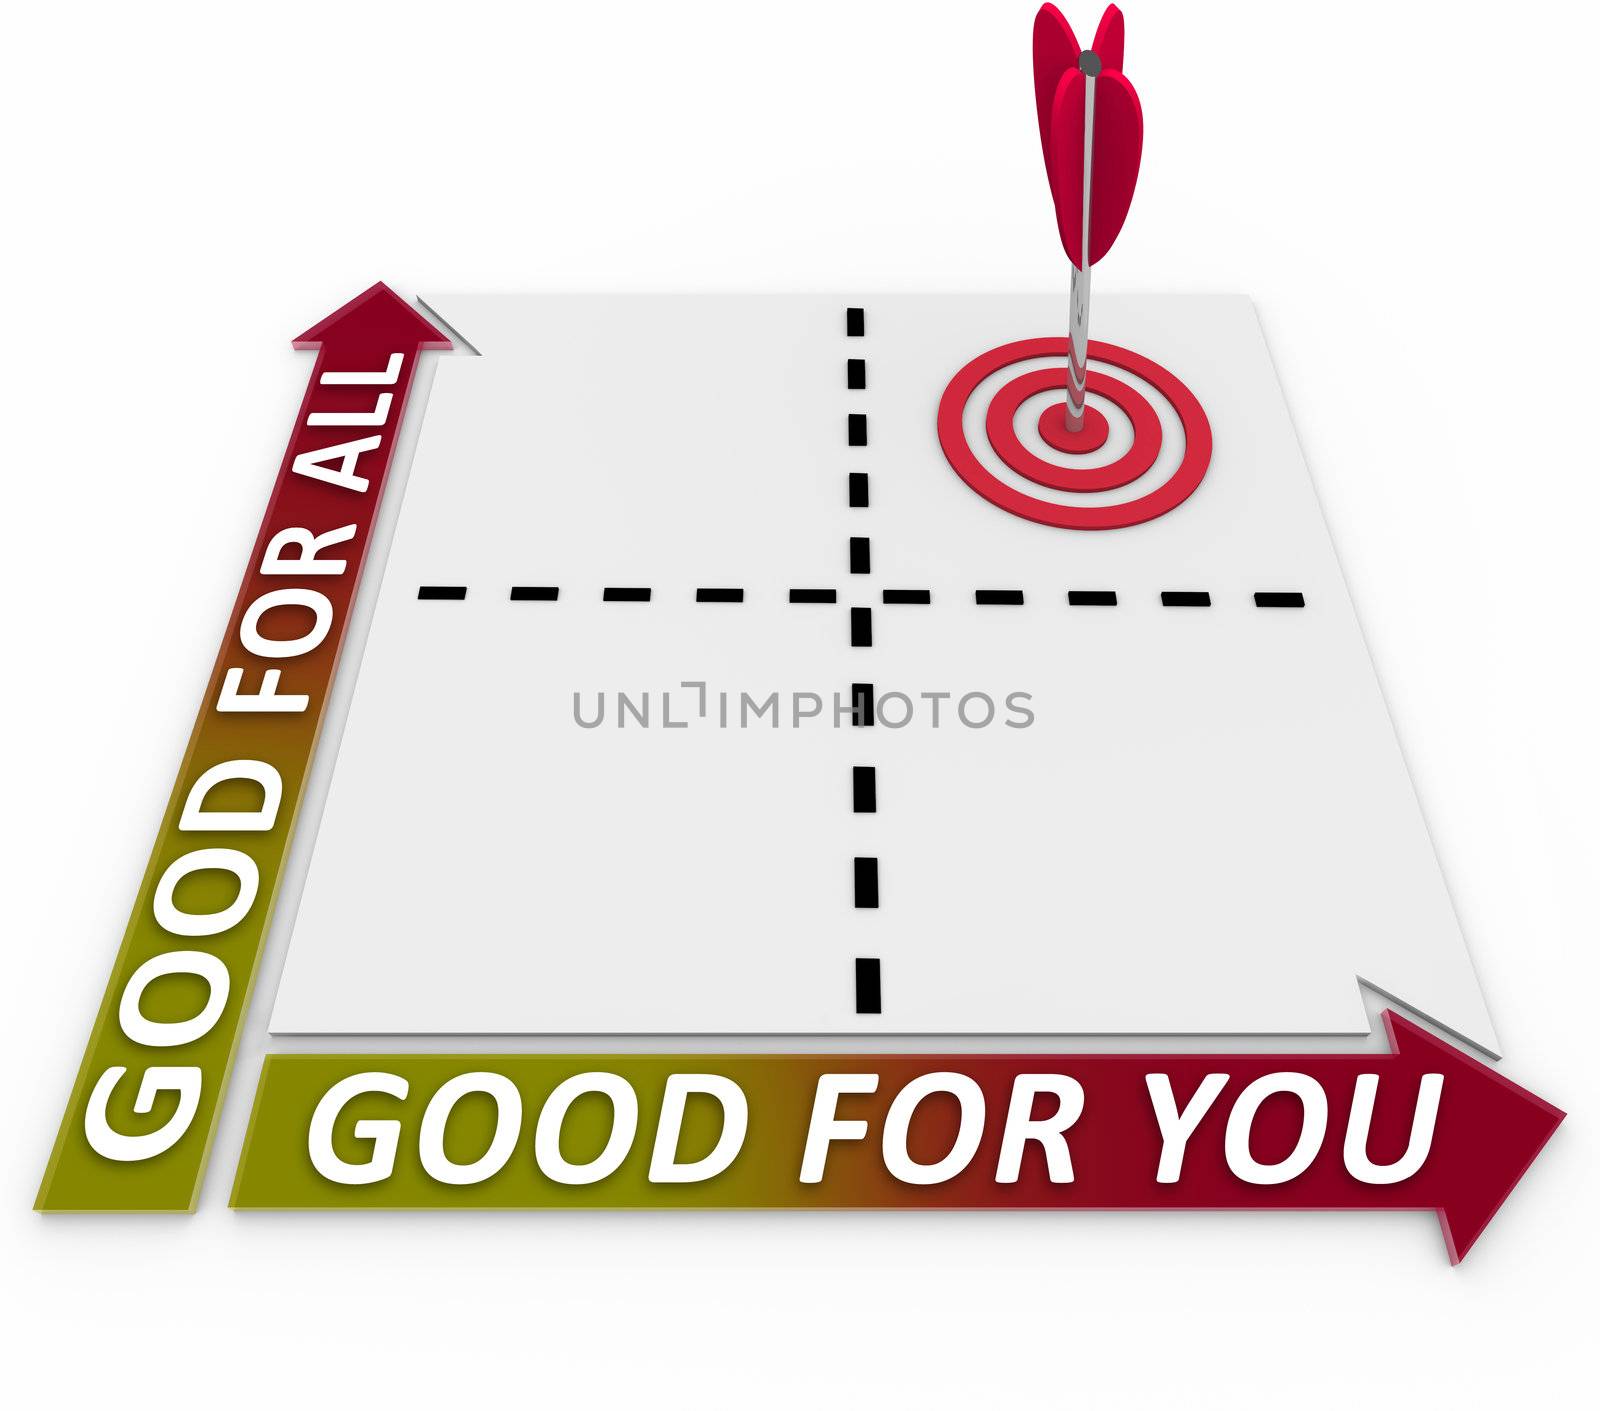 What is good for you can be good for all, and that's where your priorities should lie according to this matrix plotting choices that benefit you and the wider group